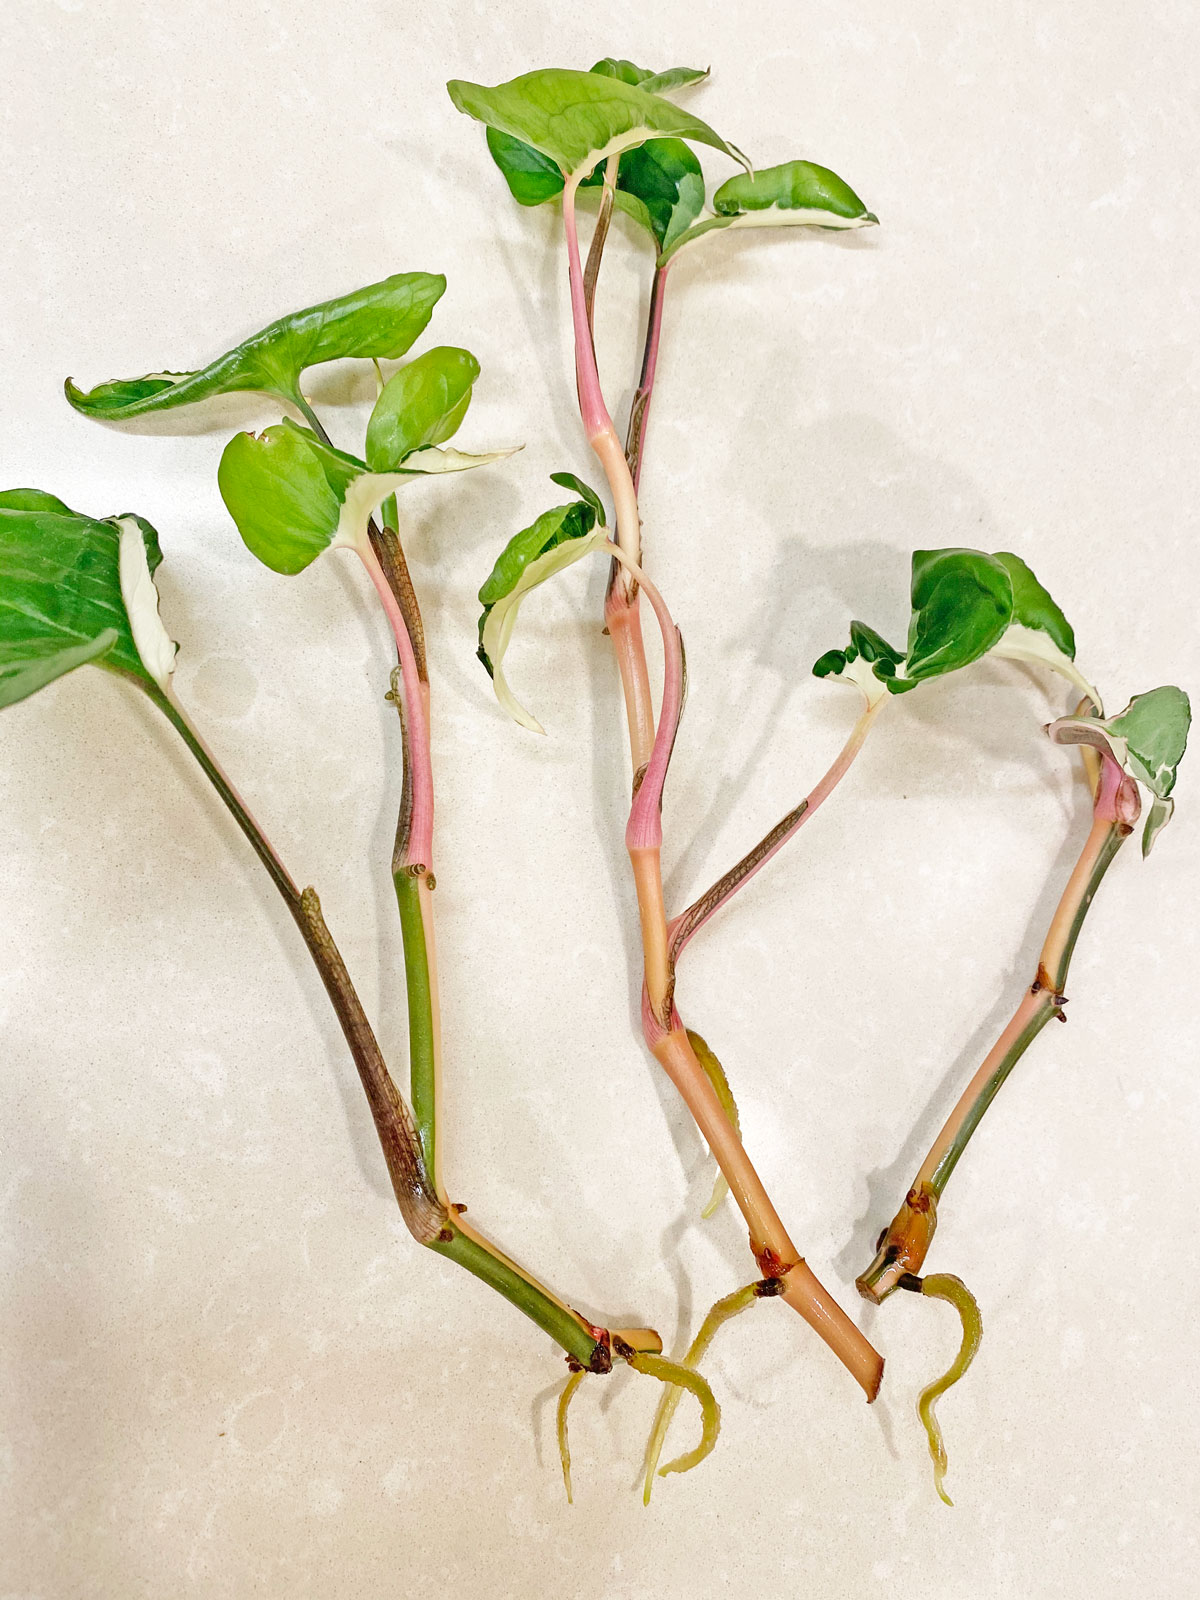 syngonium-plants-to-propagate-in-water